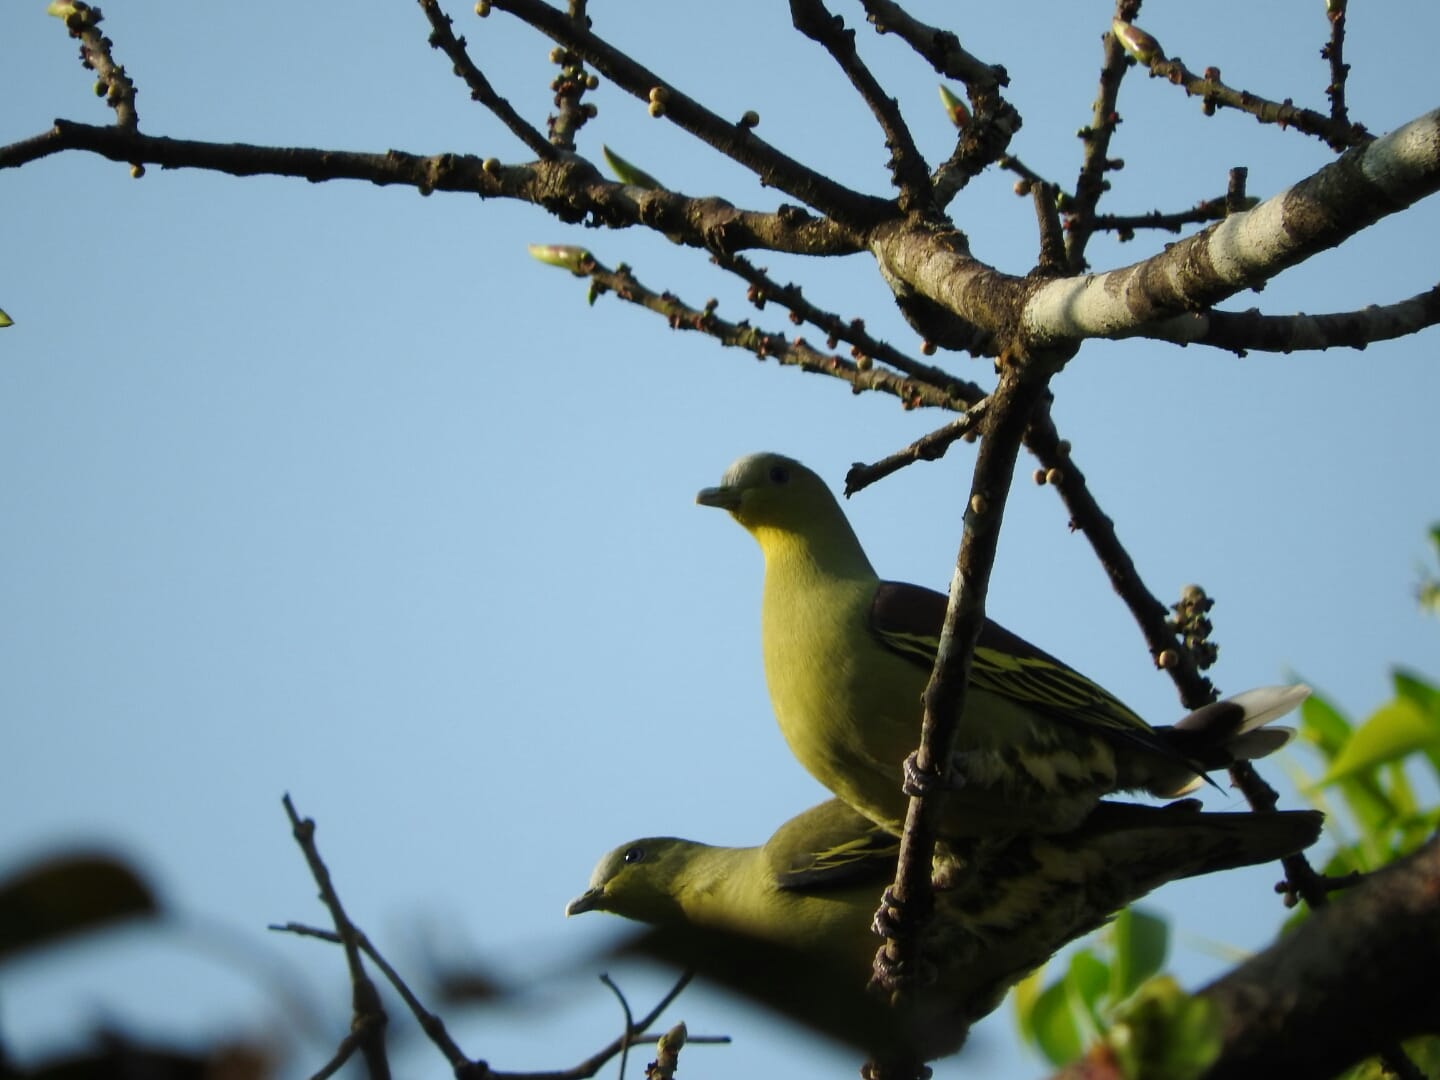 lot of beautiful birds in Bhimgad forest